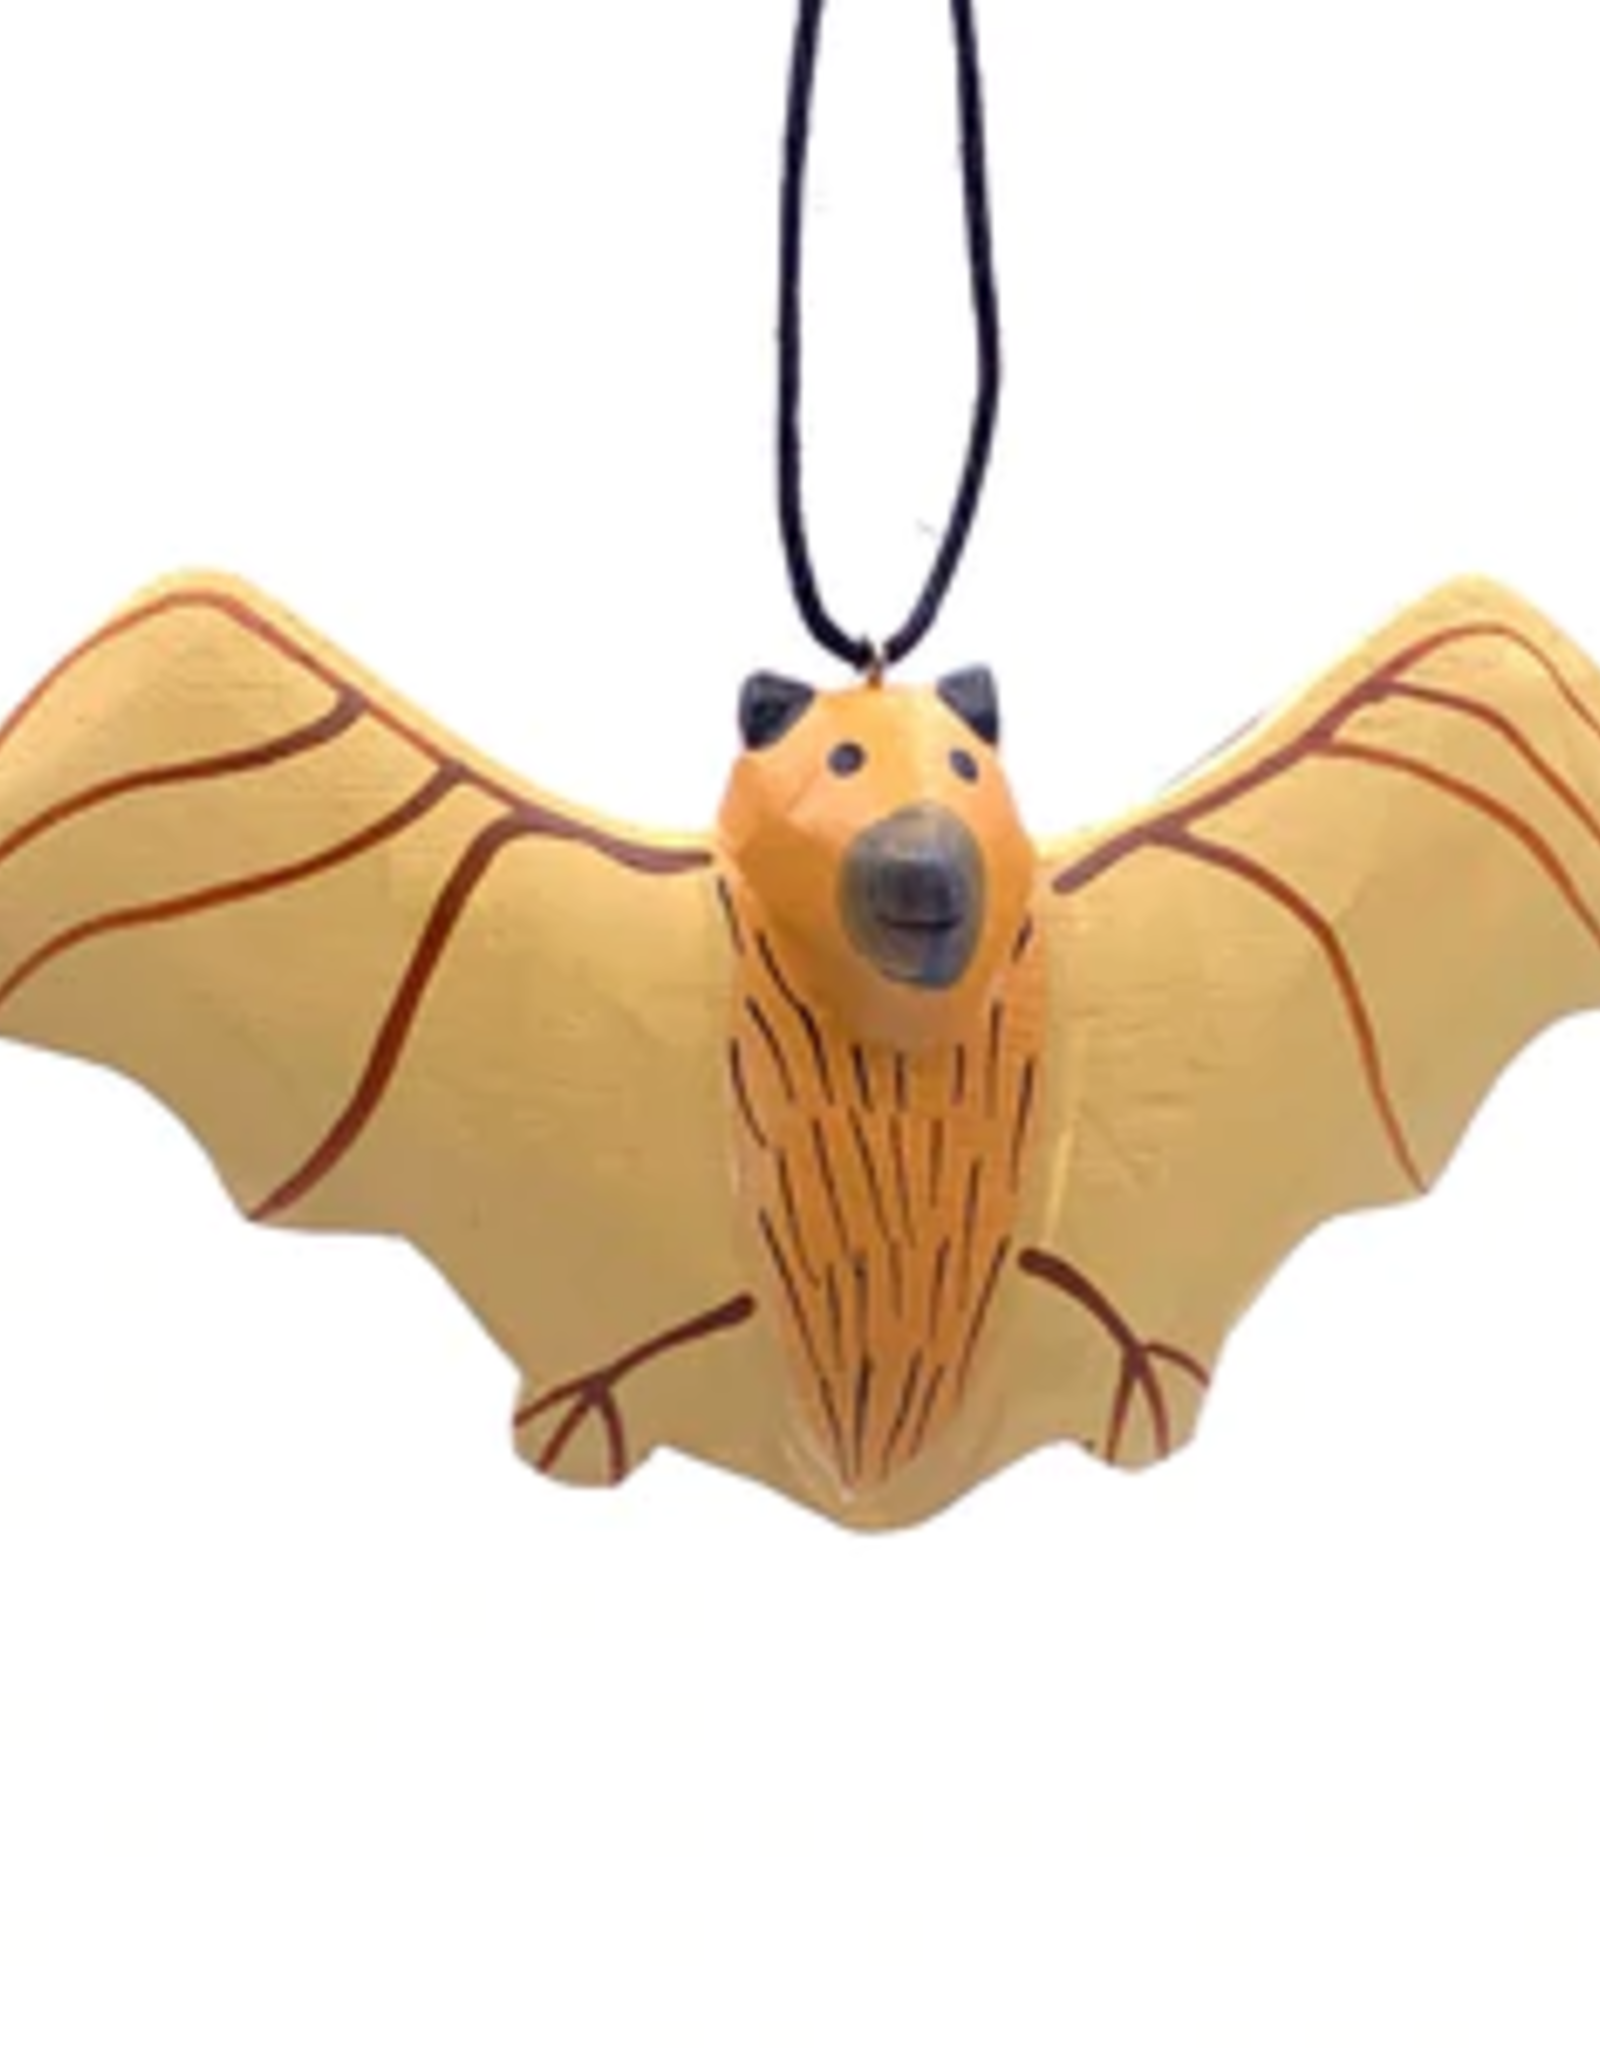 Women of the Cloud Forest Open-Winged Bat Ornament